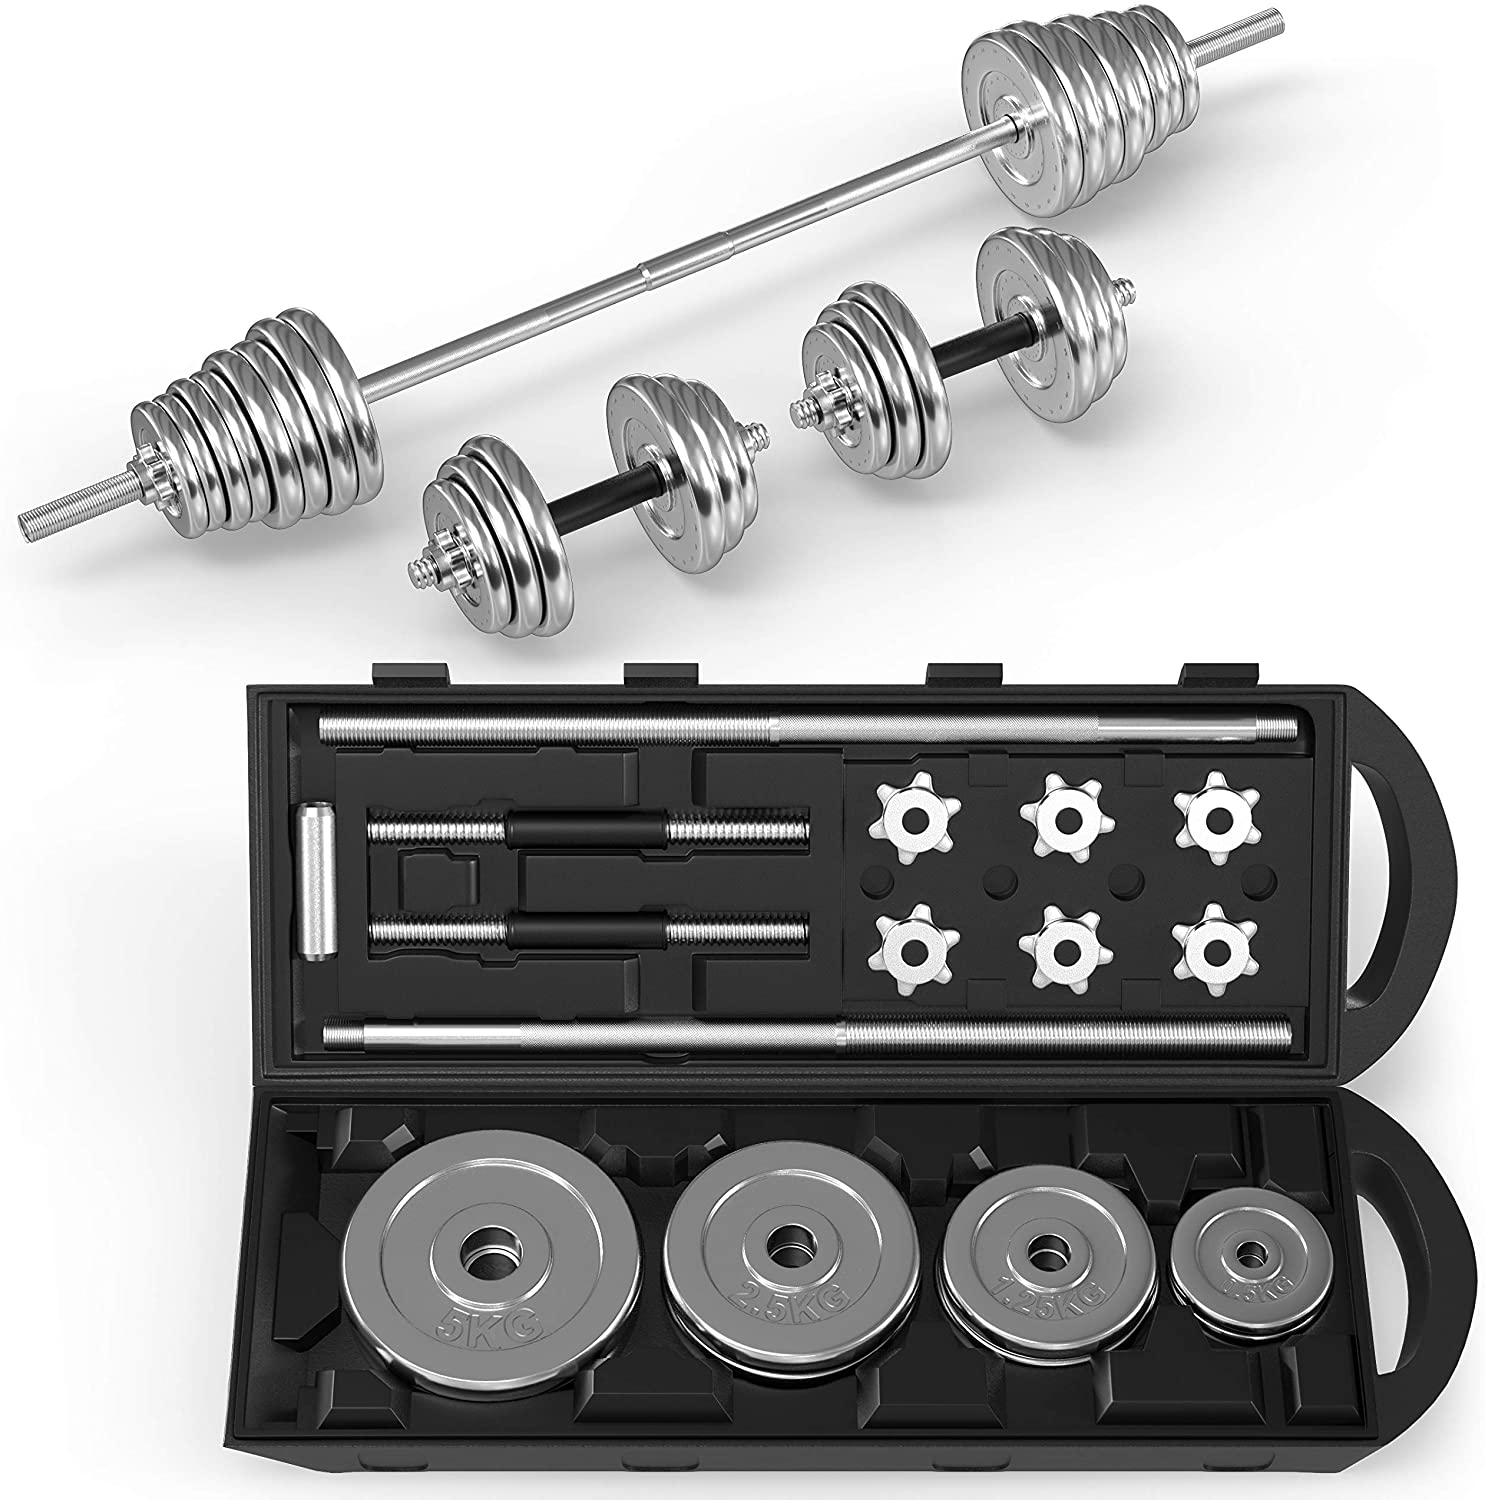 50 KG Chrome Cast Iron Dumbbell Set With Barbell